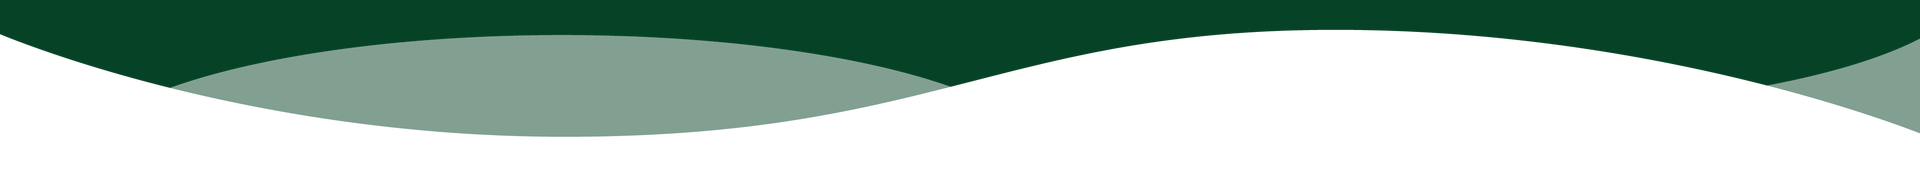 A pixel art of a green and gray wave on a white background.